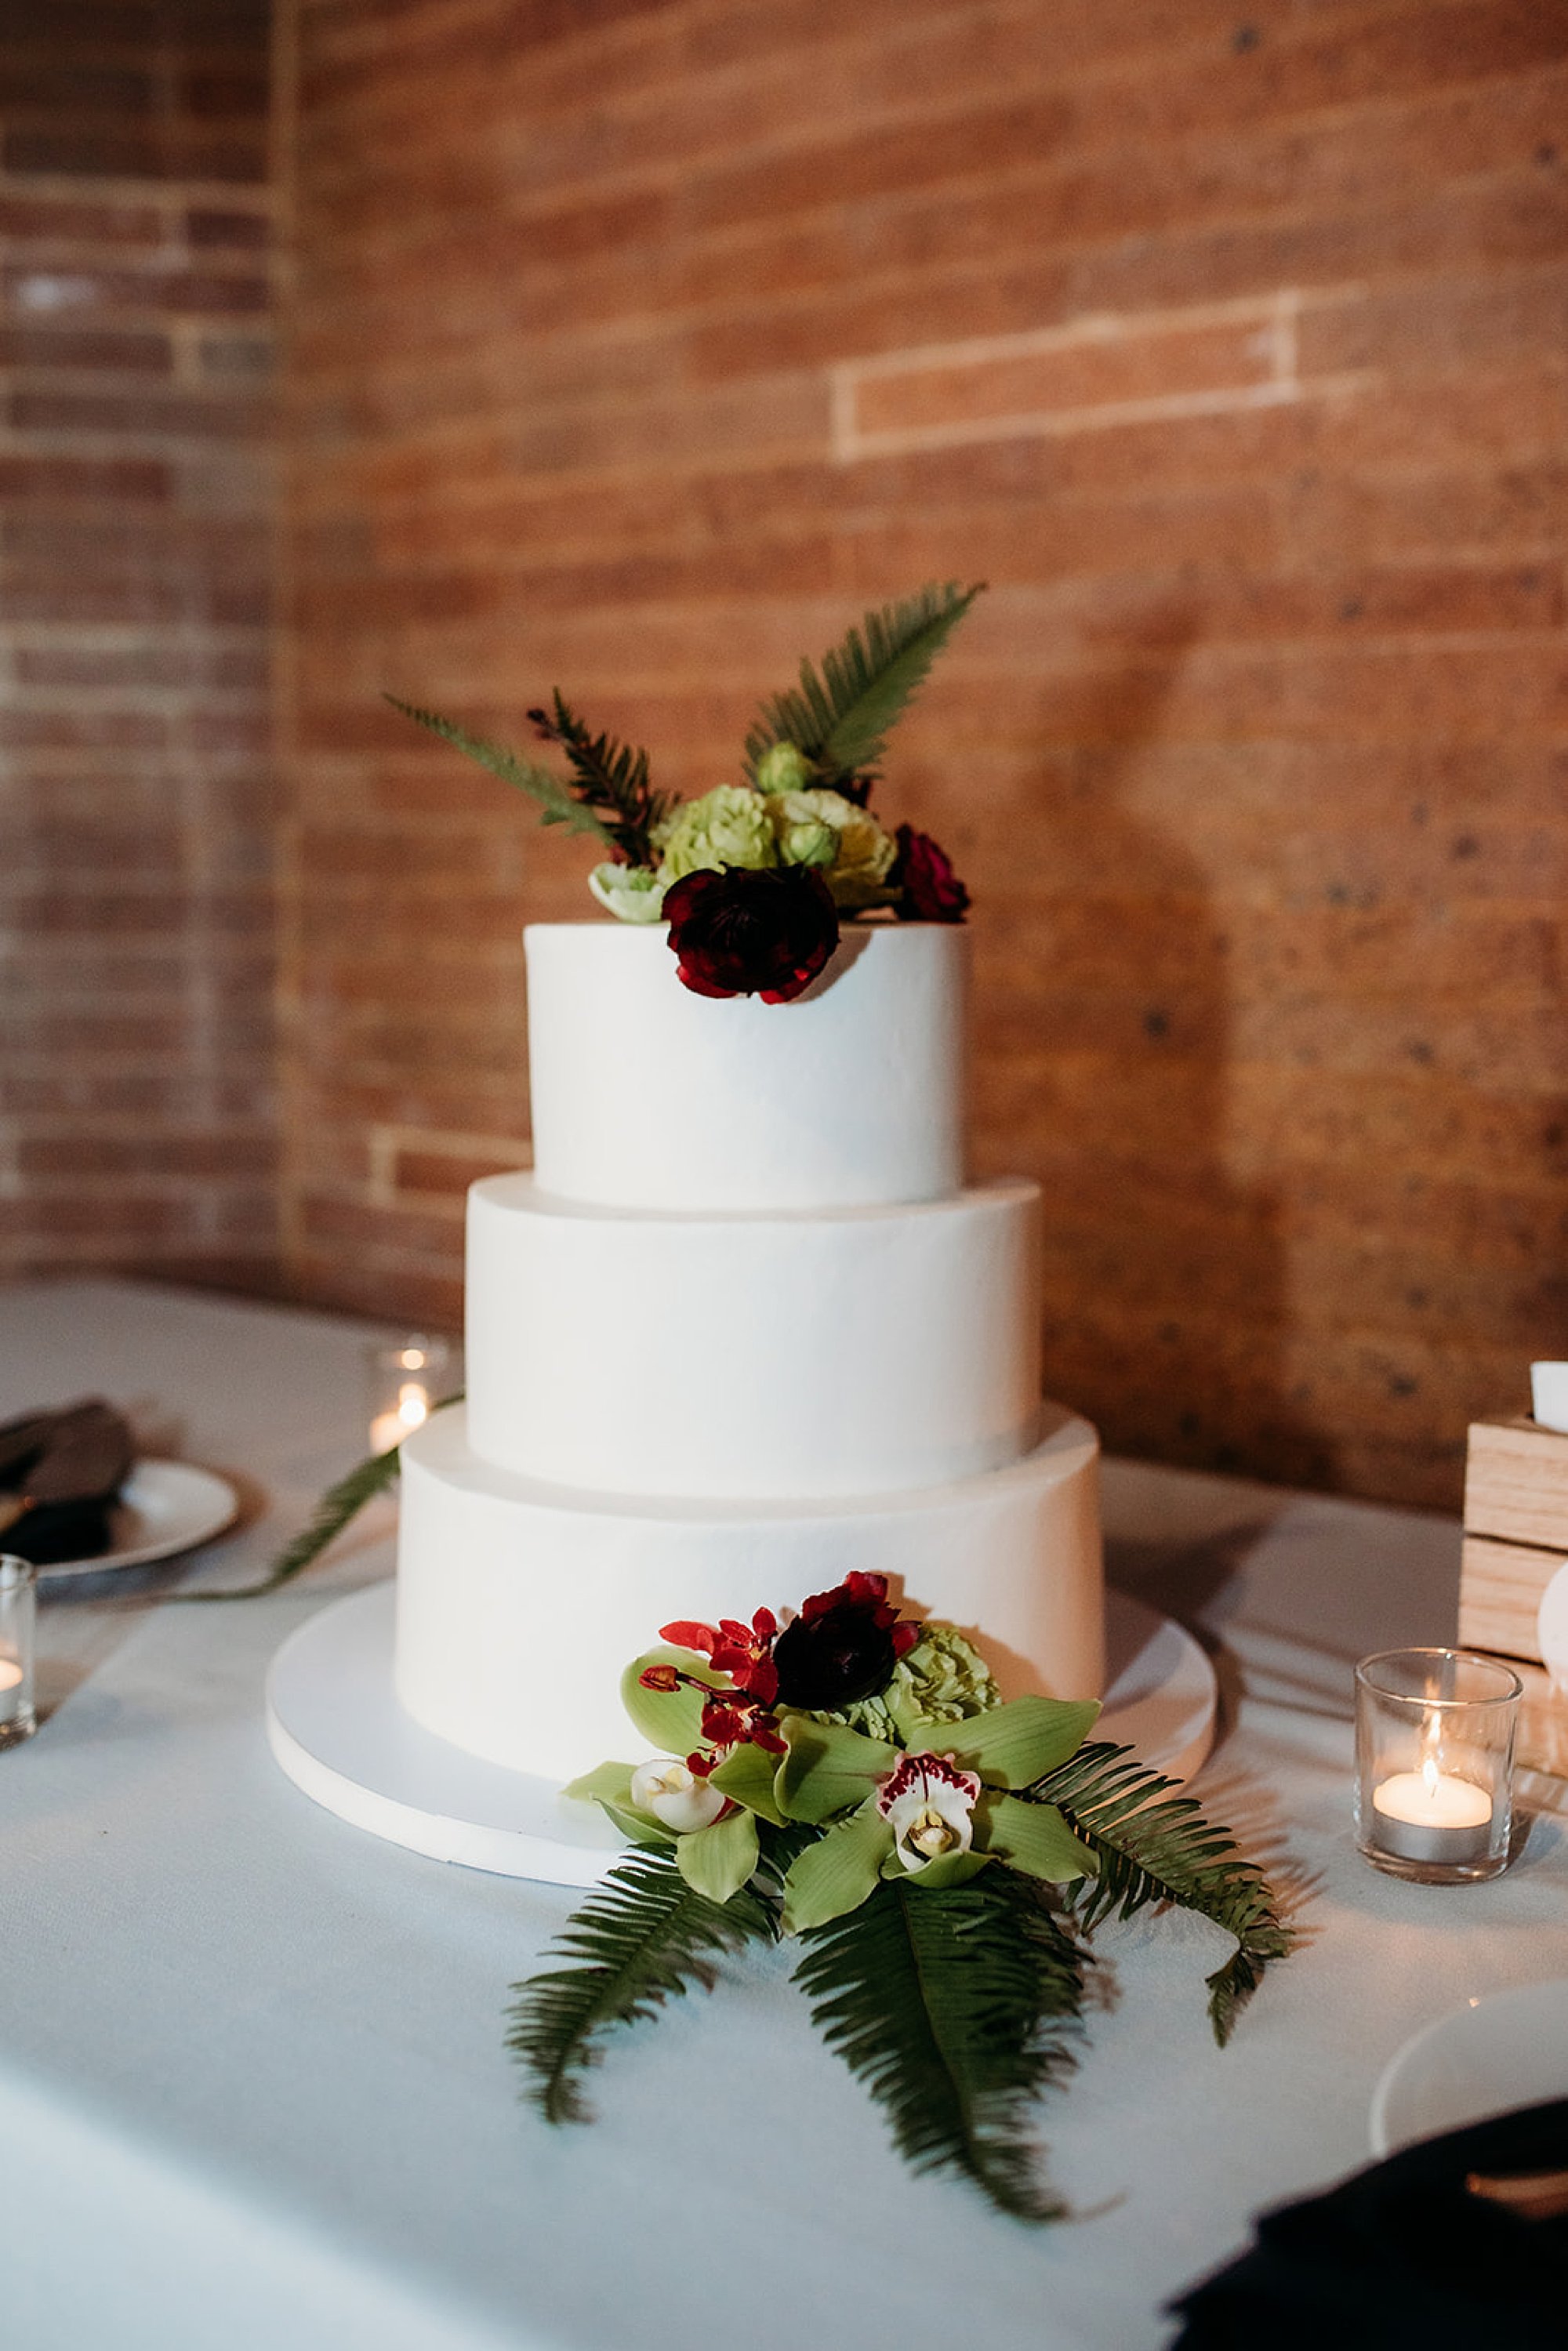 tiered wedding cake with green and red flowers at The Bronx Zoo wedding reception at the Old Lion House